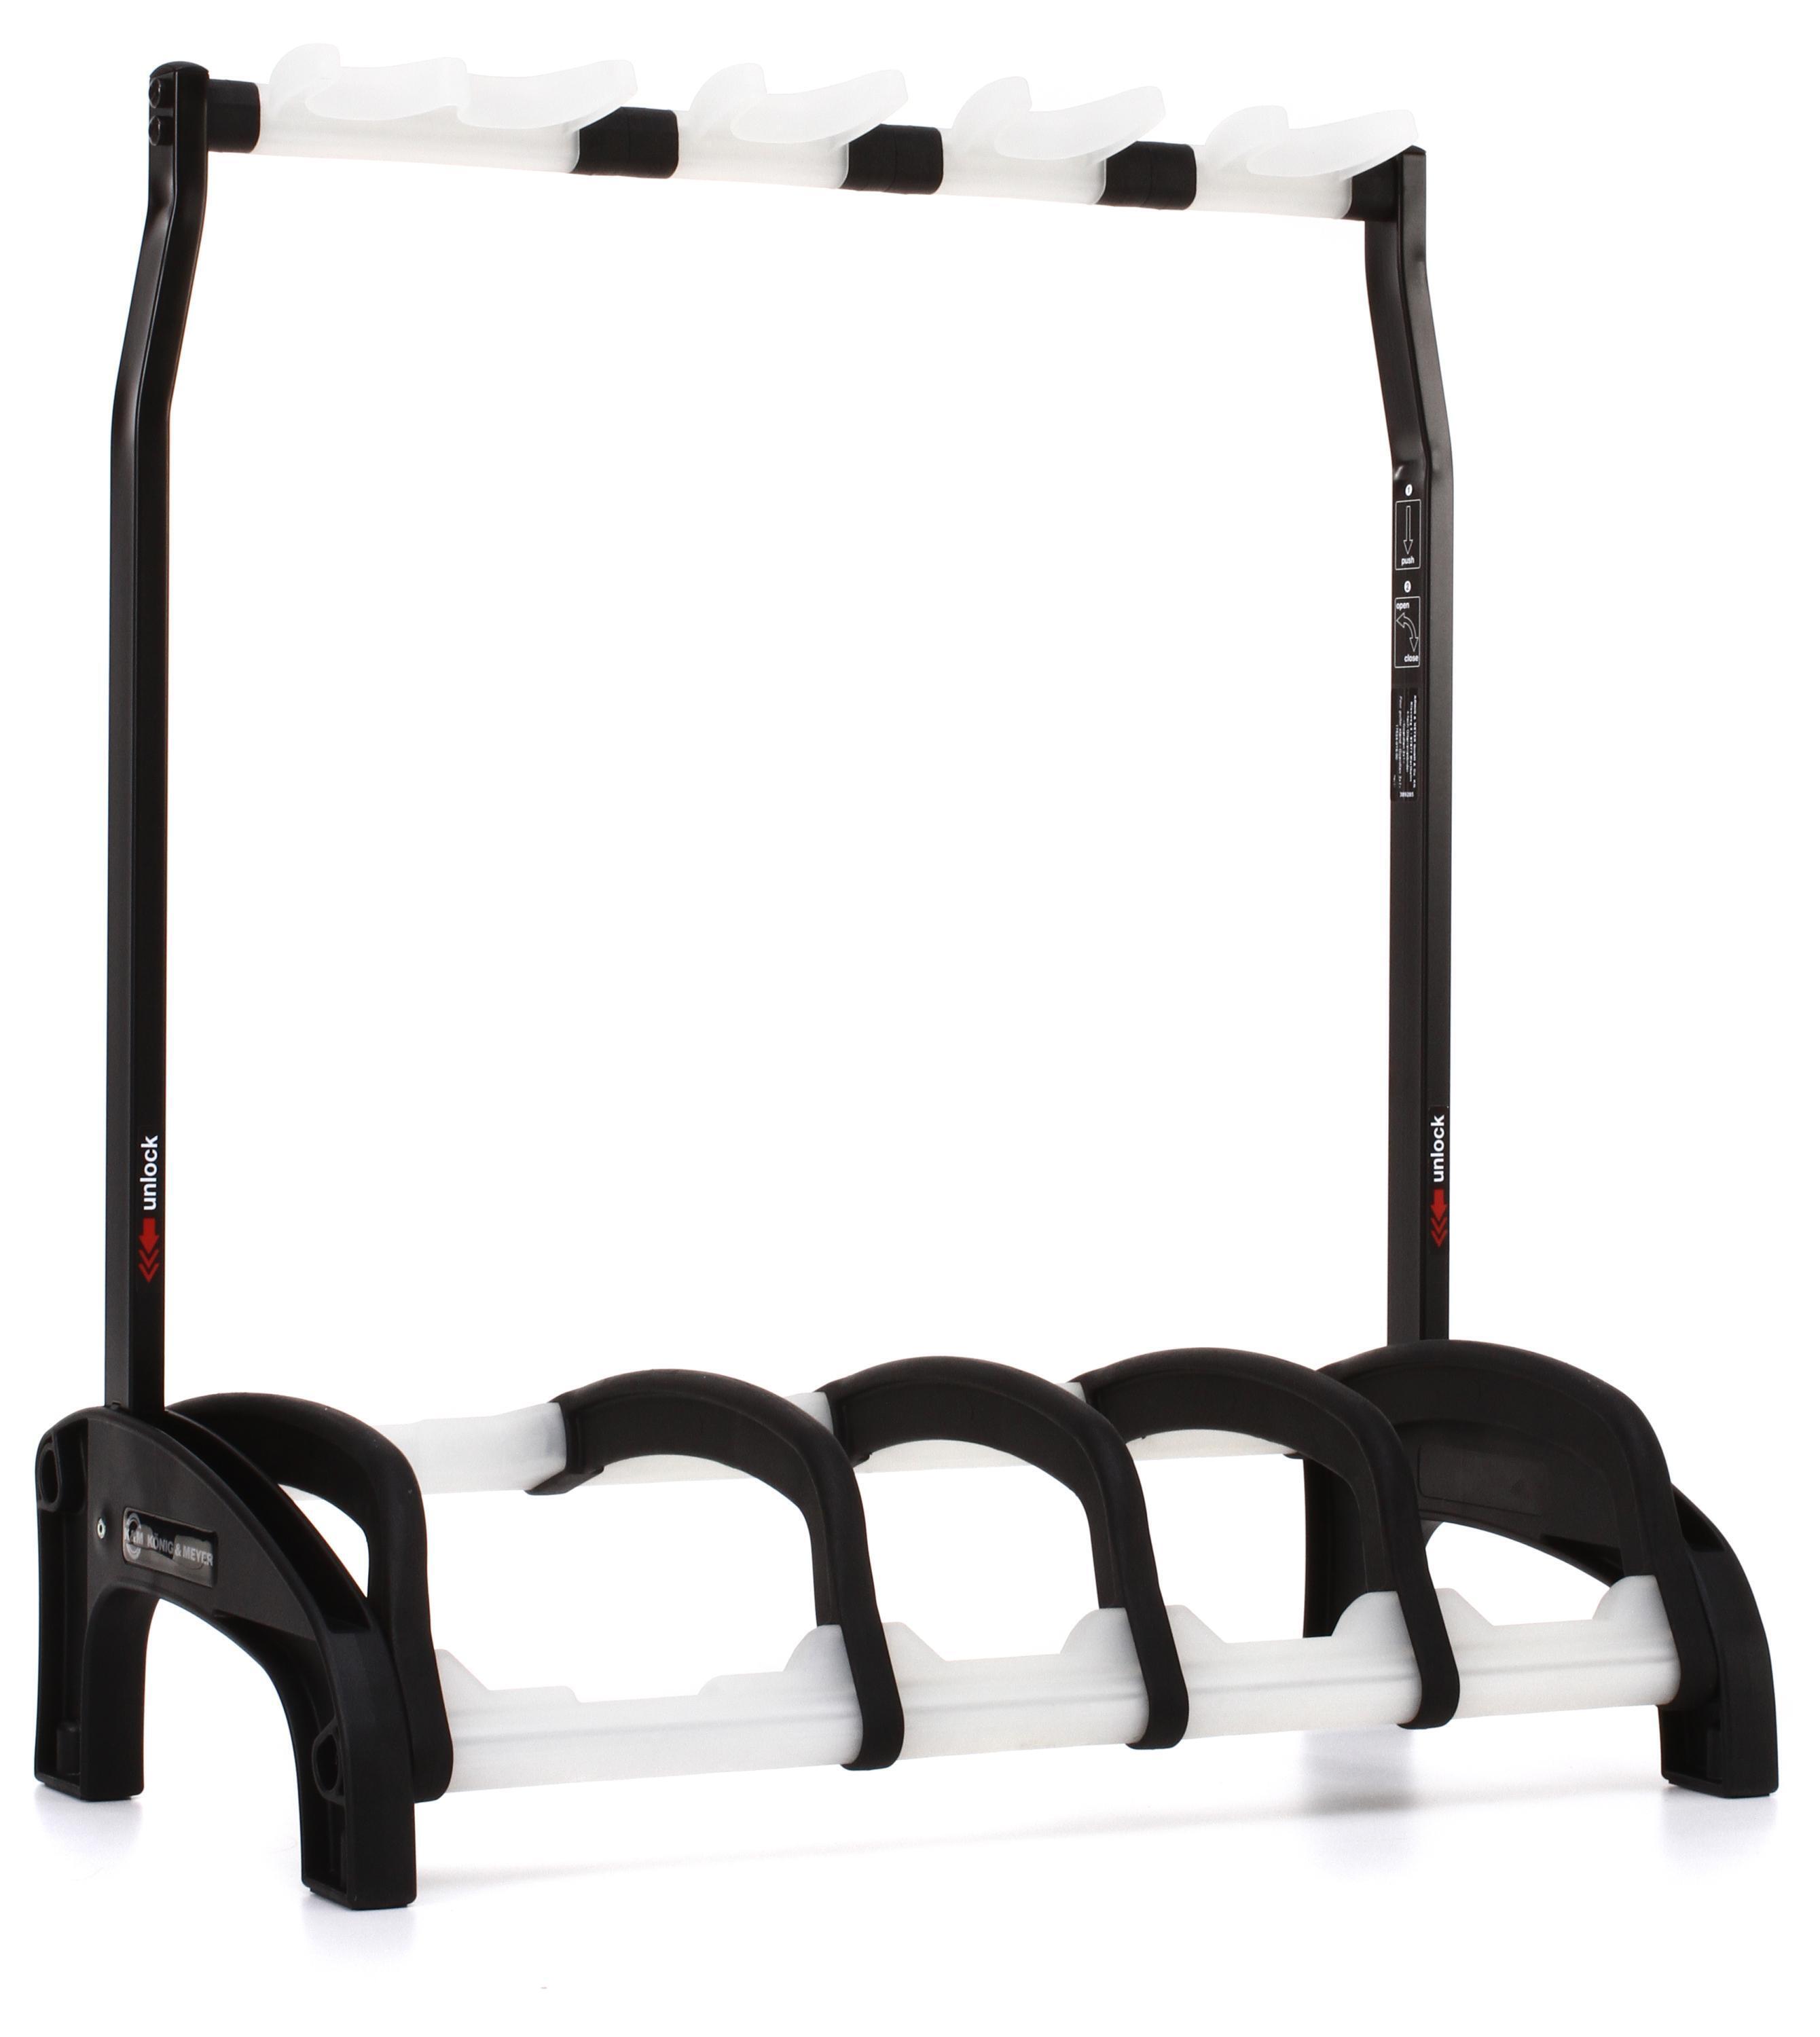 K&M 17534 Guardian 3+1 Multi Guitar Stand - Black with Translucent 